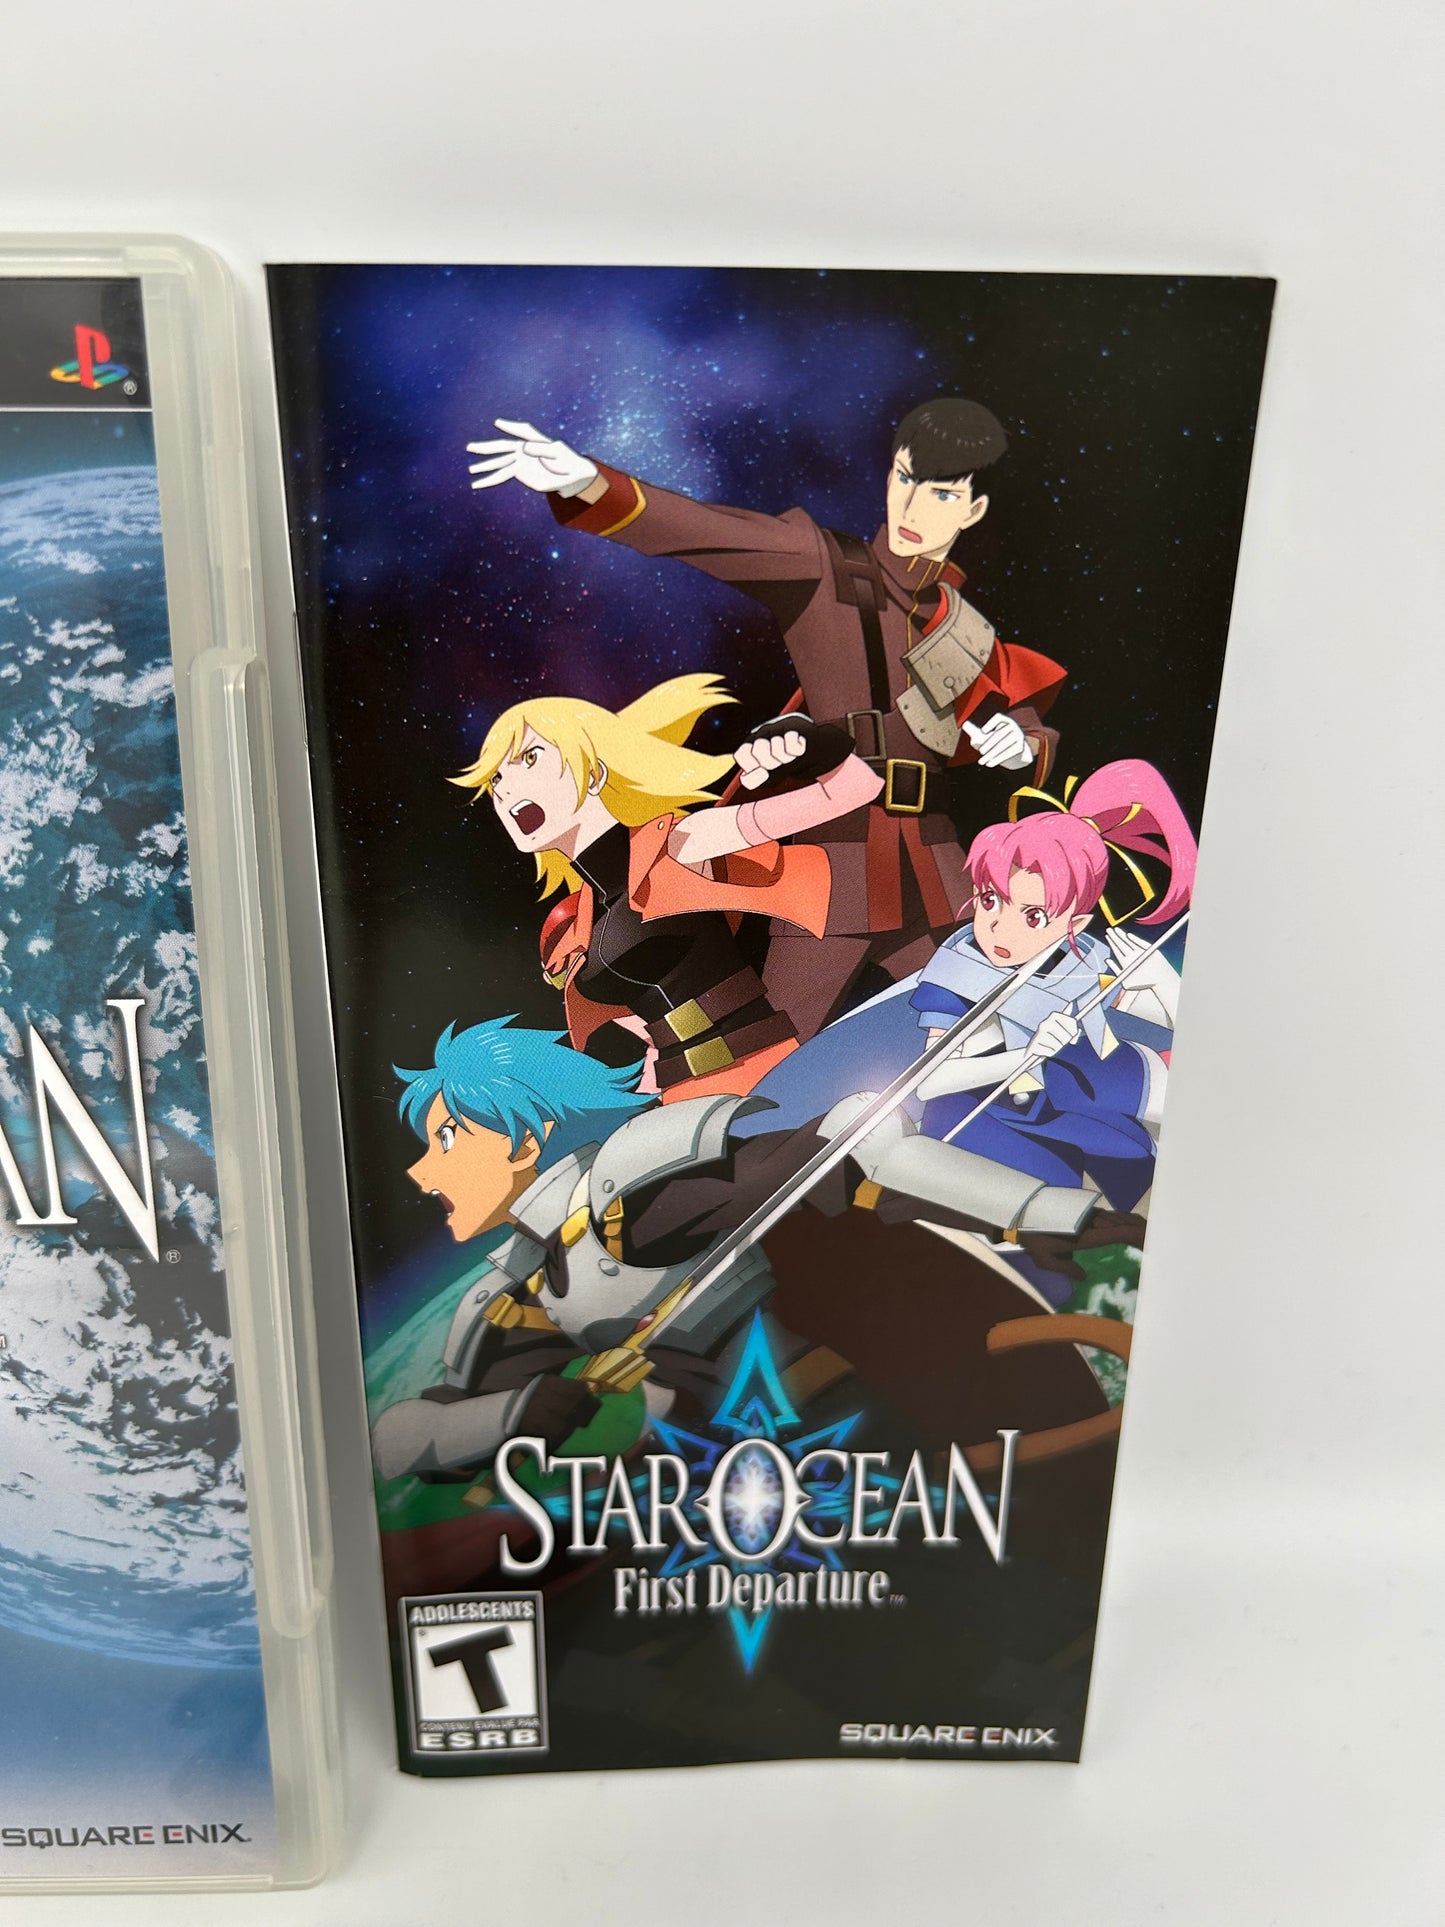 SONY PLAYSTATiON PORTABLE [PSP] | STAR OCEAN FiRST DEPARTURE